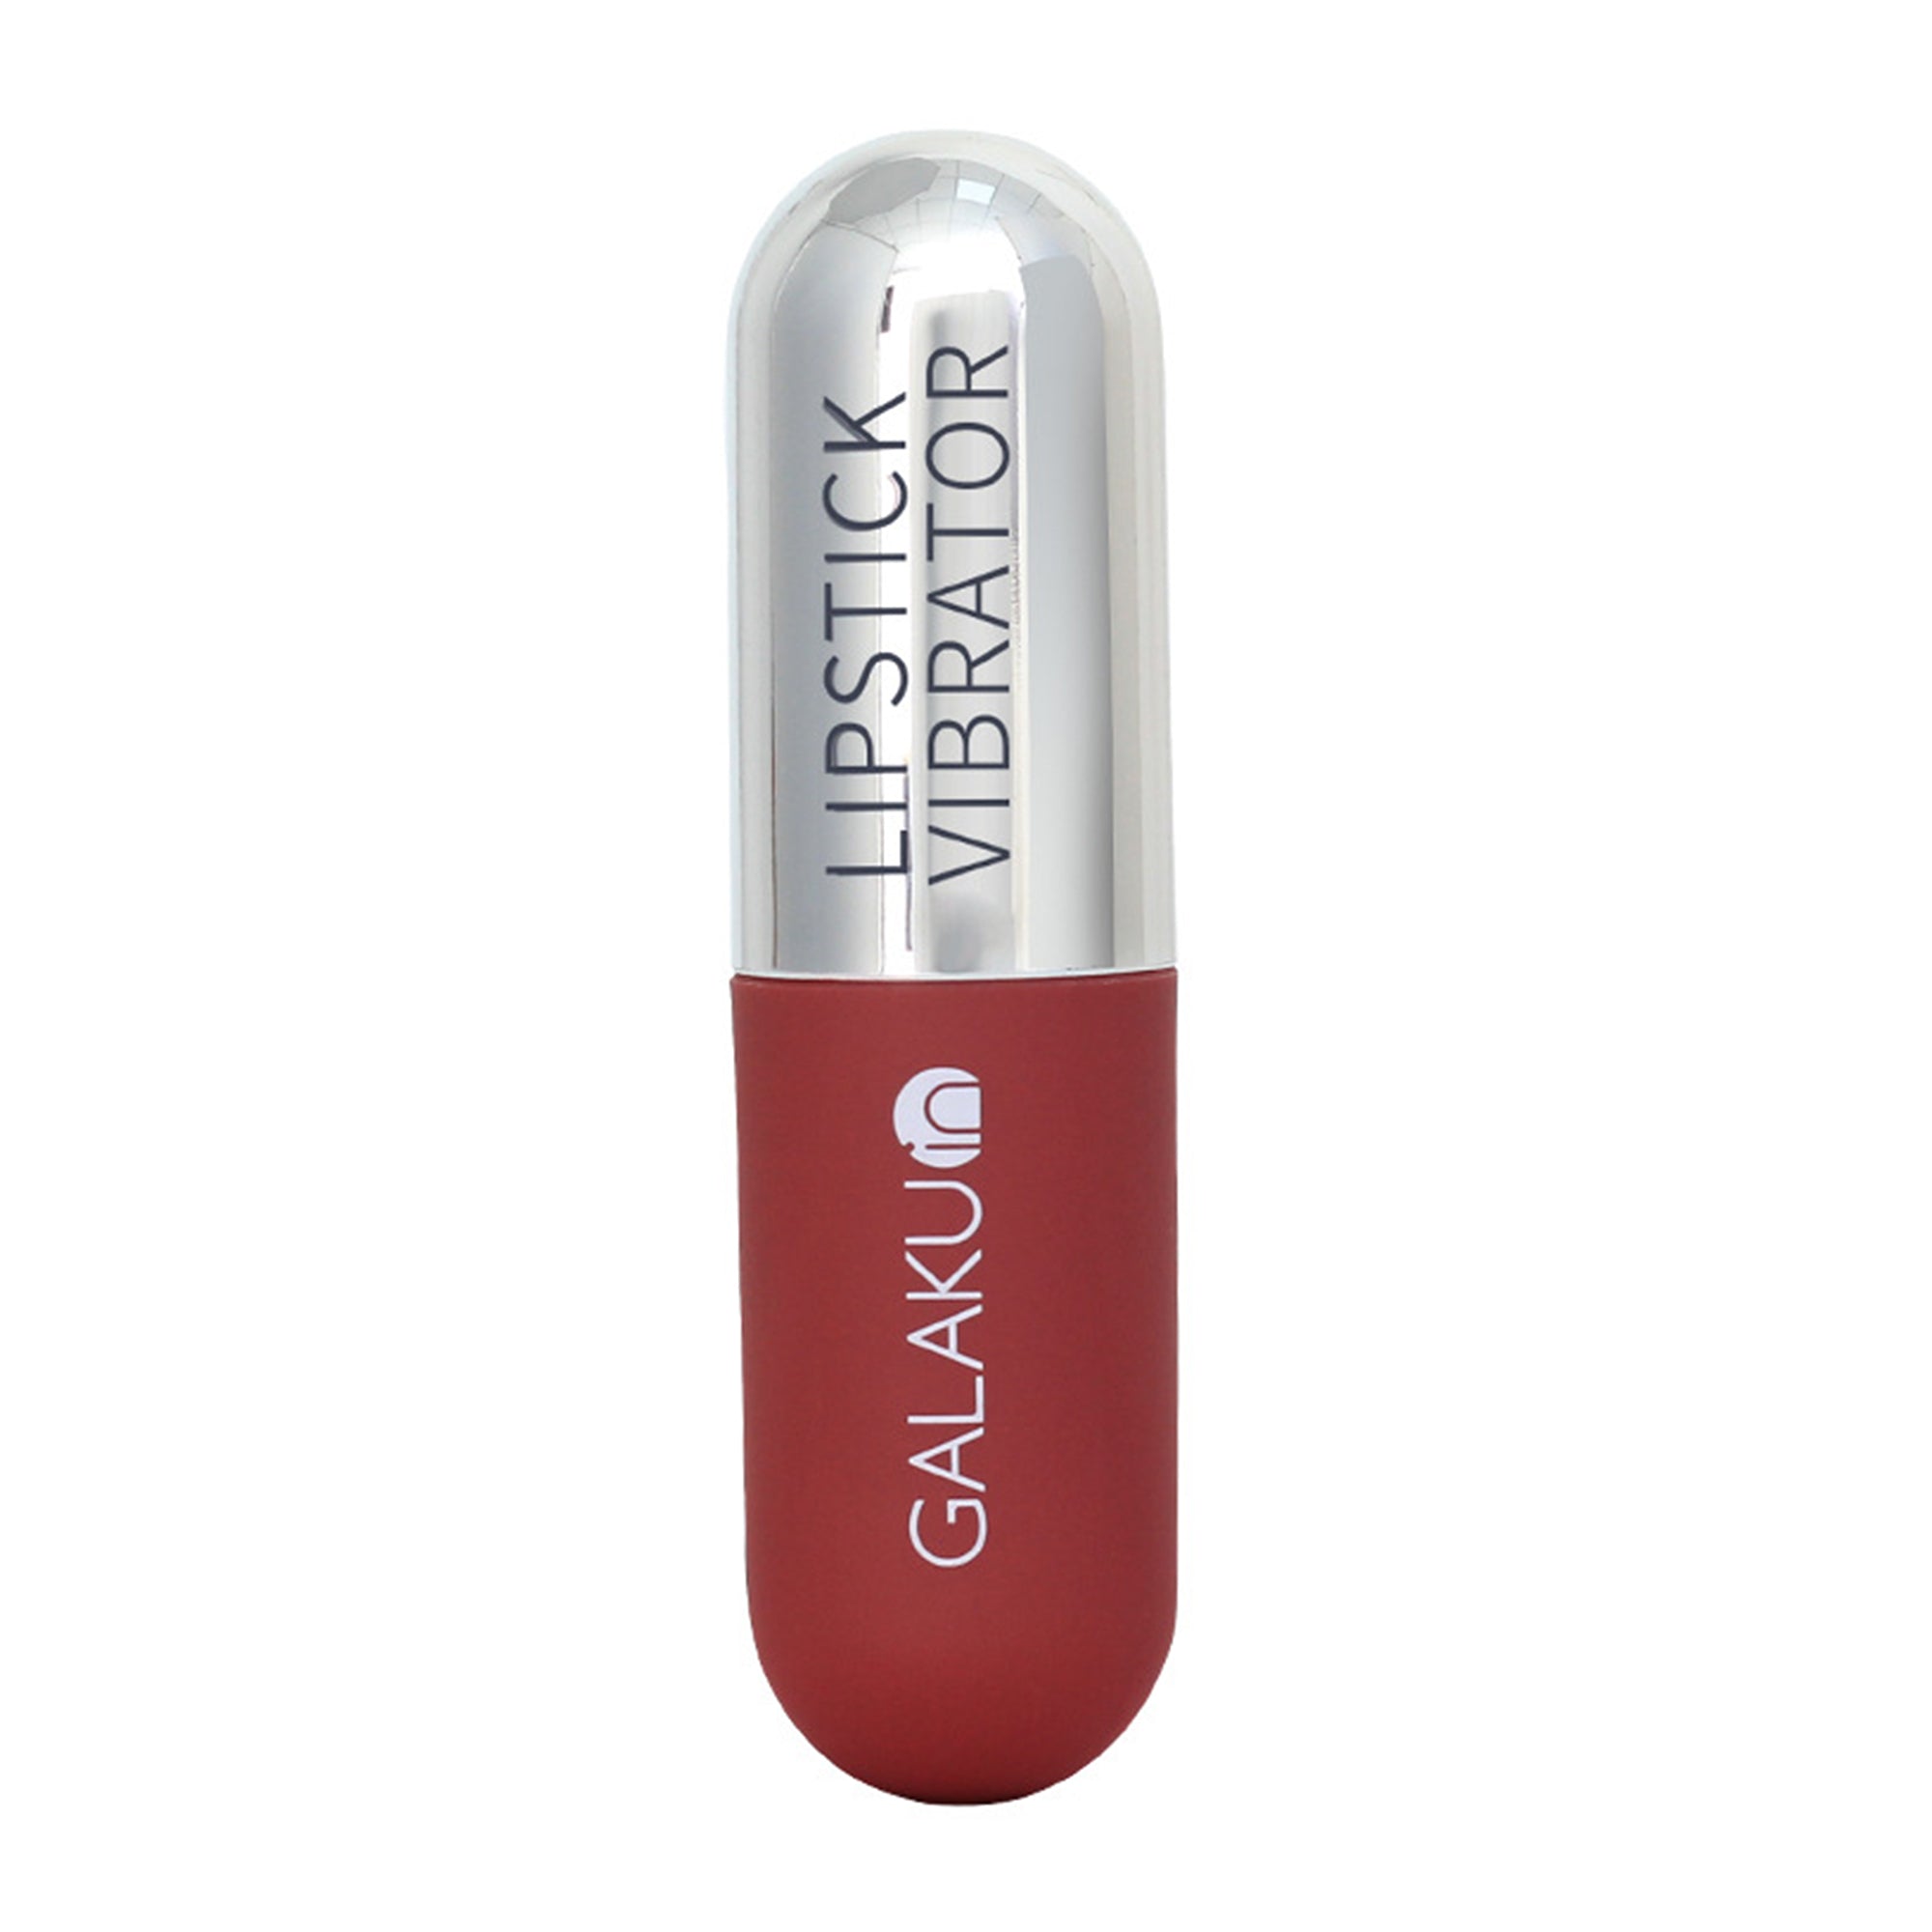 Galaku New Capsule Lipstick Variable Frequency Strong Vibrator (AI Version)